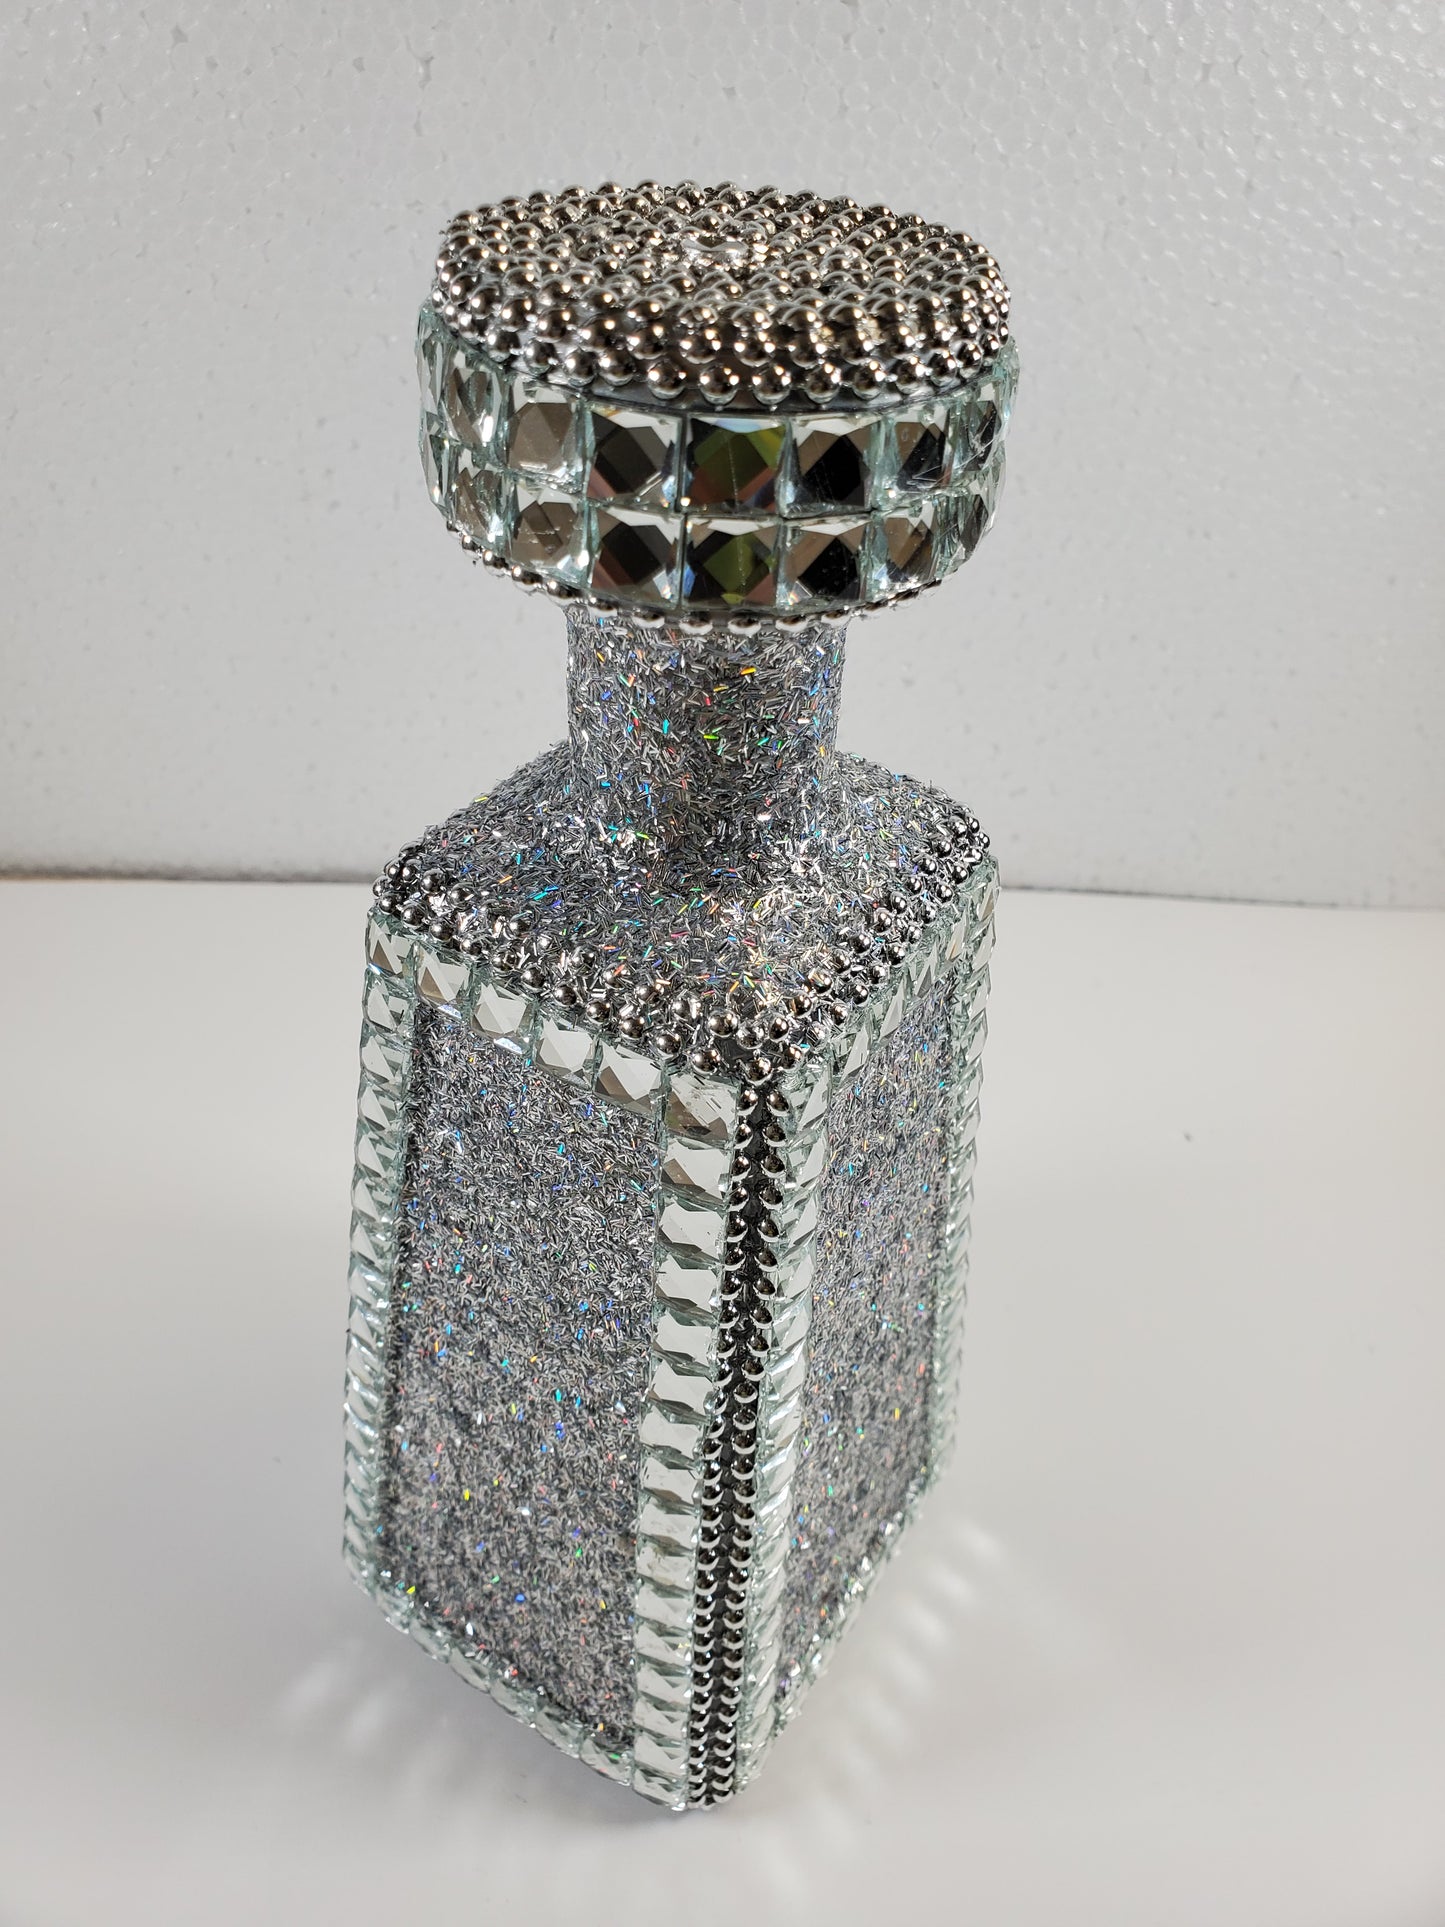 Dazzling Recycled Wine Bottles.